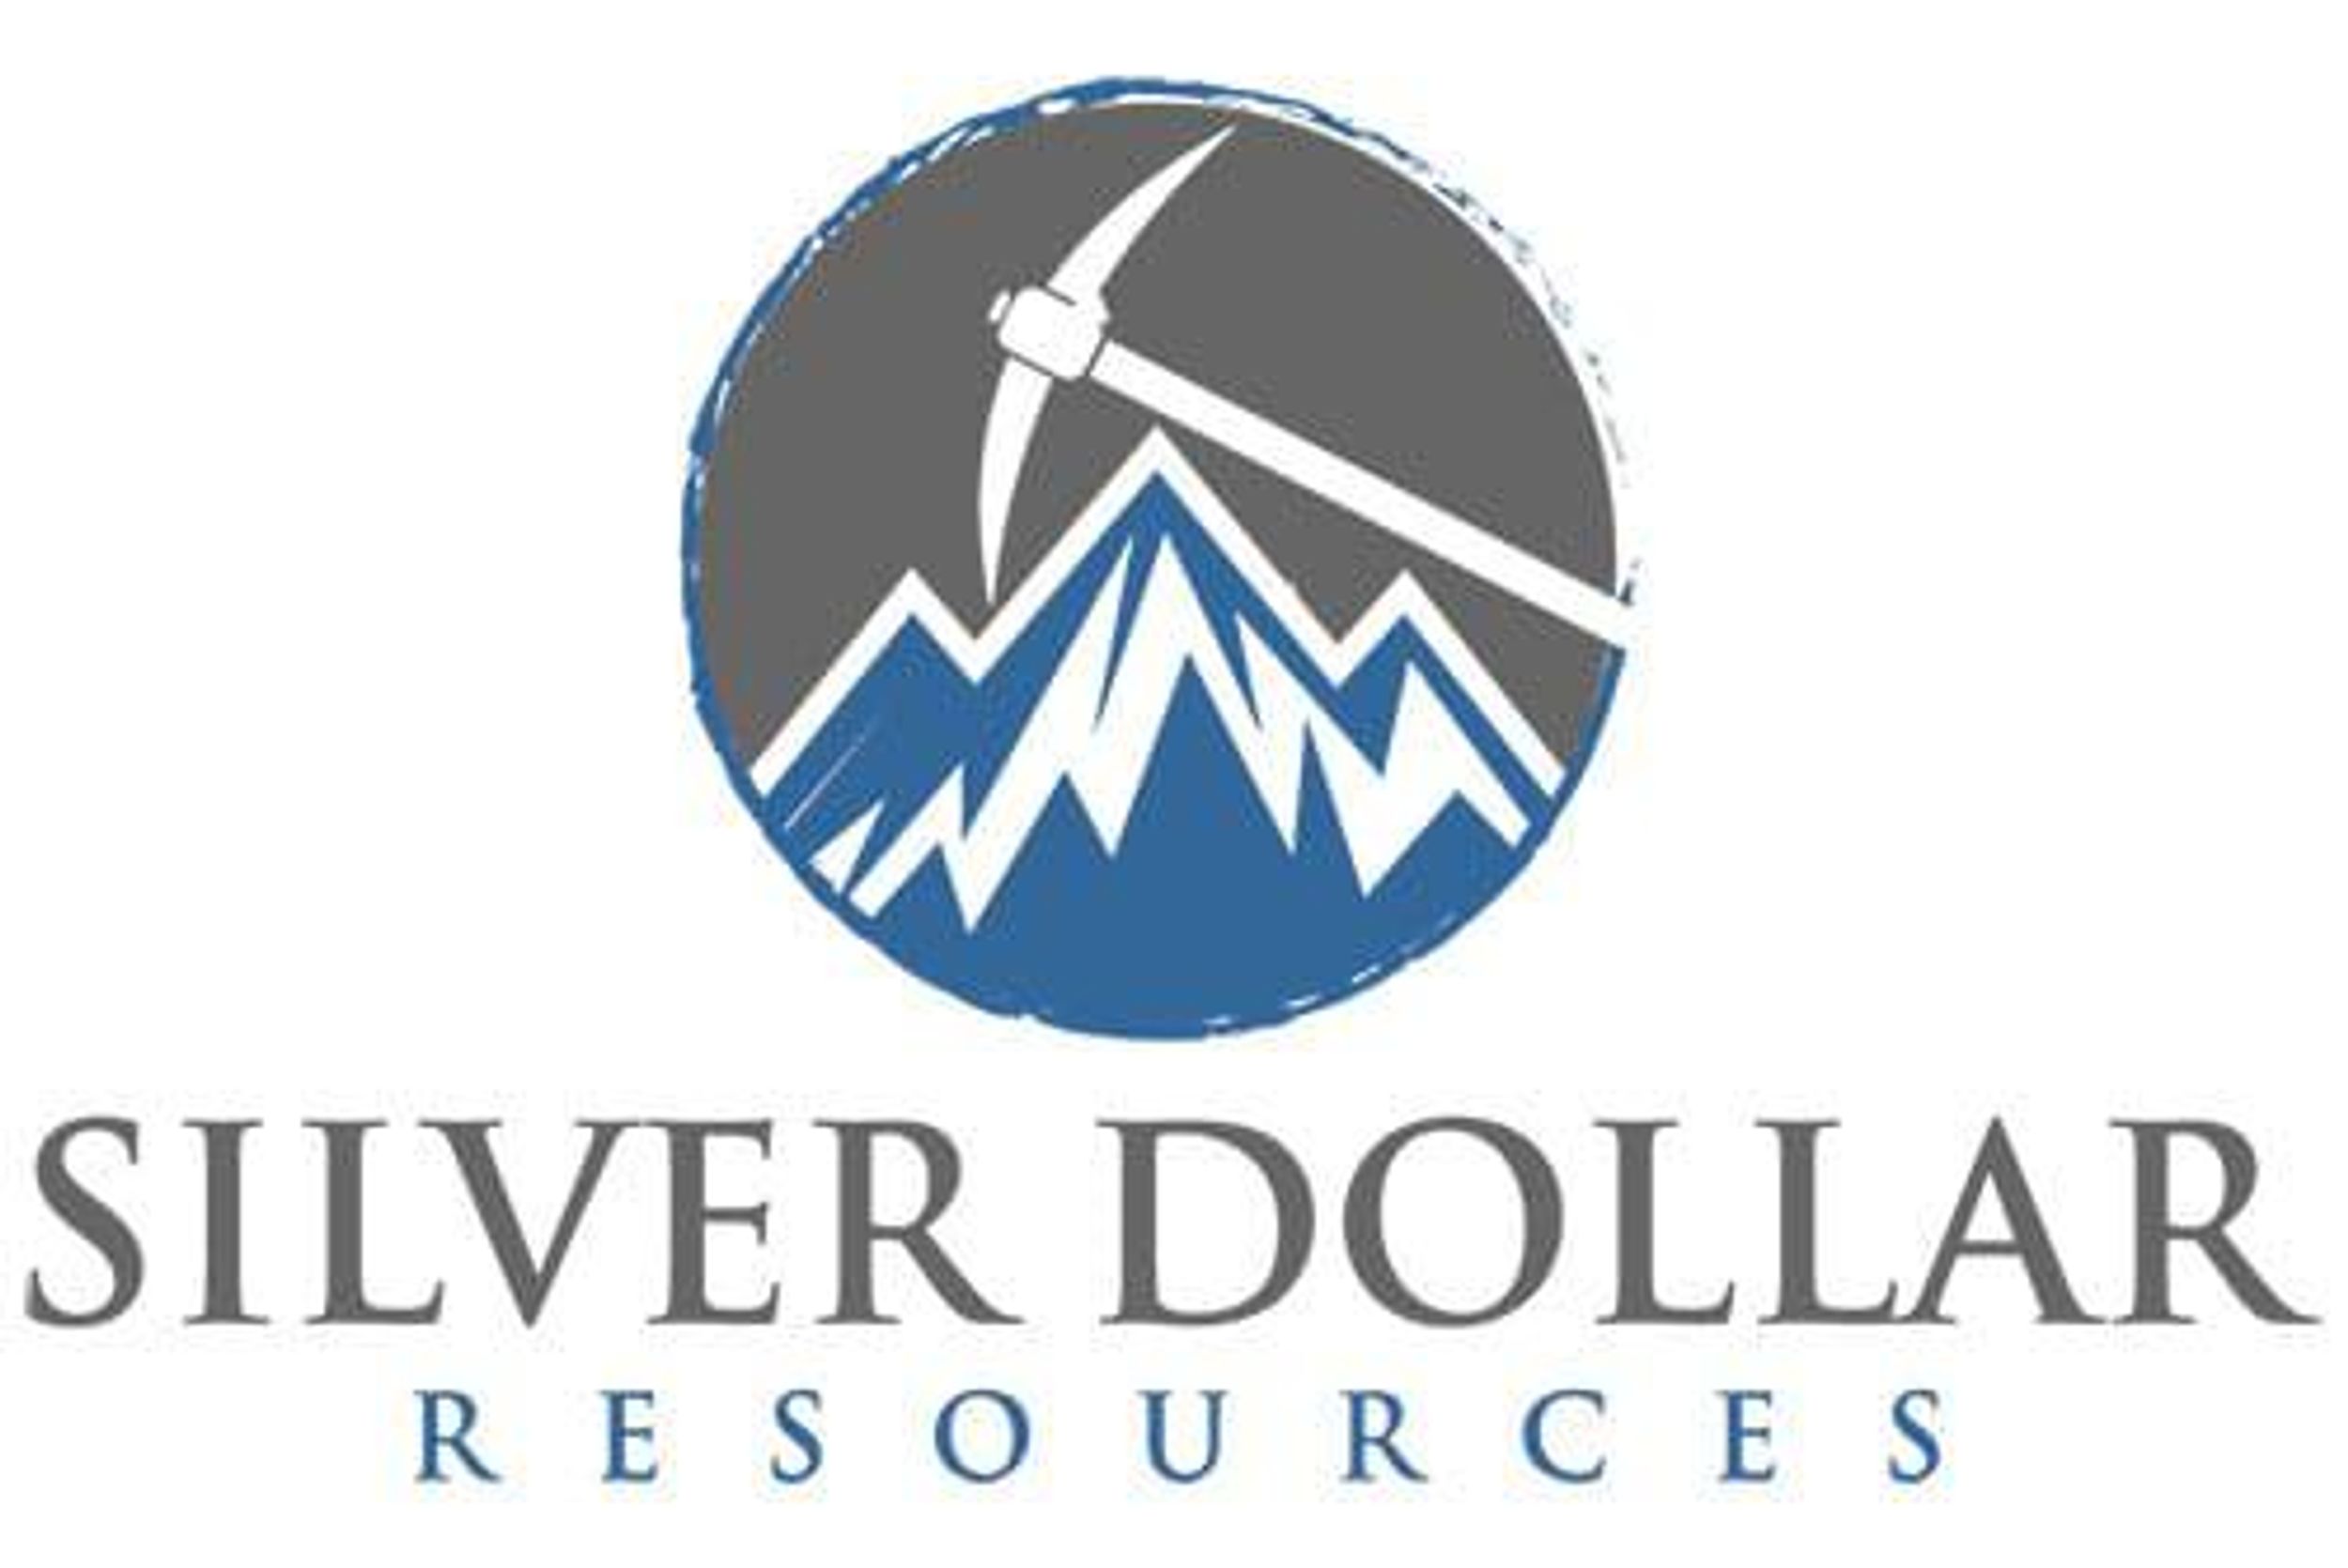 OTC Markets Group Welcomes Silver Dollar Resources Inc. to OTCQX